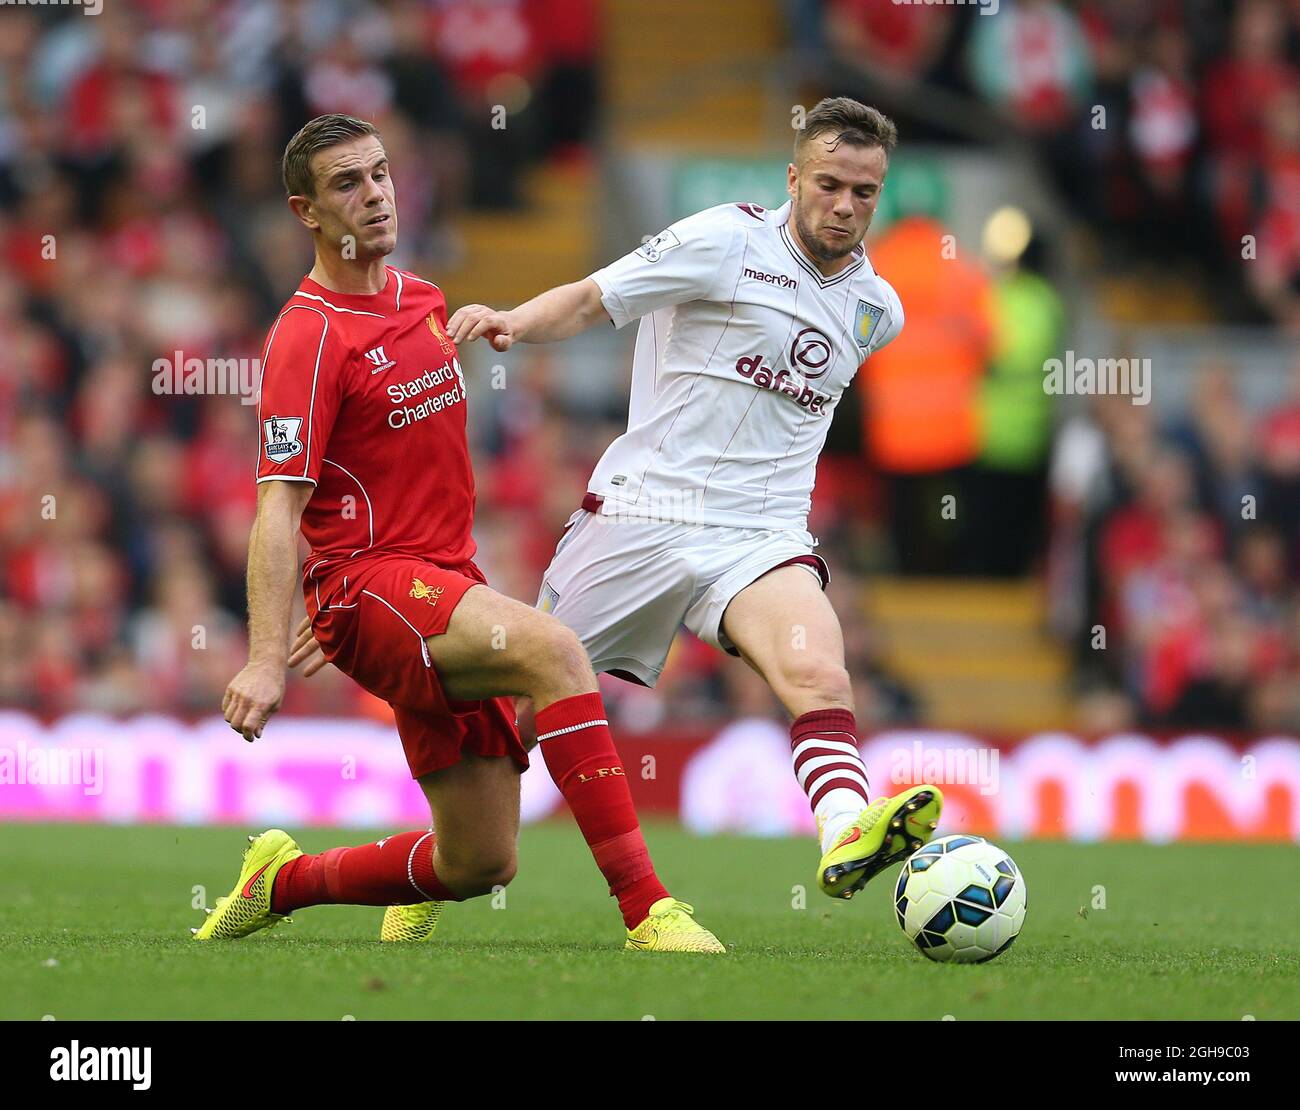 Jordan Henderson of Liverpool tackled by Tom Cleverley of Aston Villa during their English Premier League soccer match at Anfield in Liverpool, northern England September 13, 2014. Stock Photo